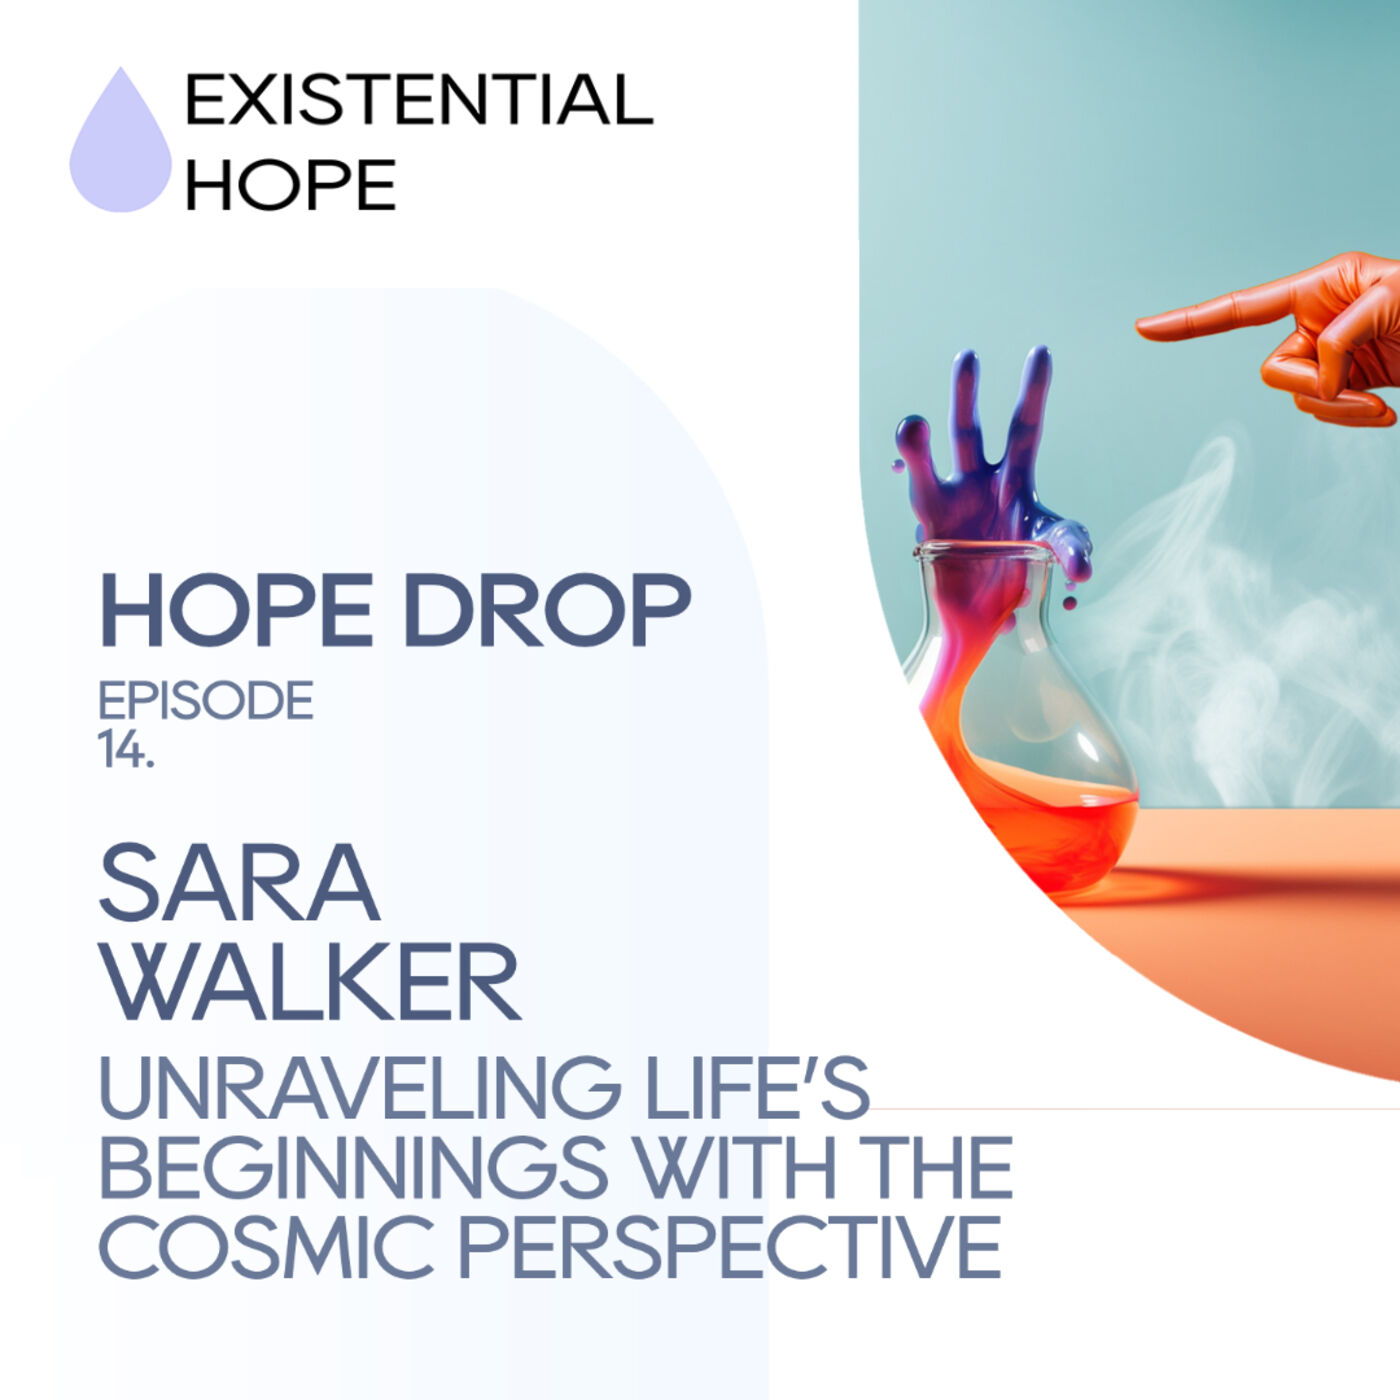 Sara Walker | Unraveling Life's Beginnings with the Cosmic Perspective